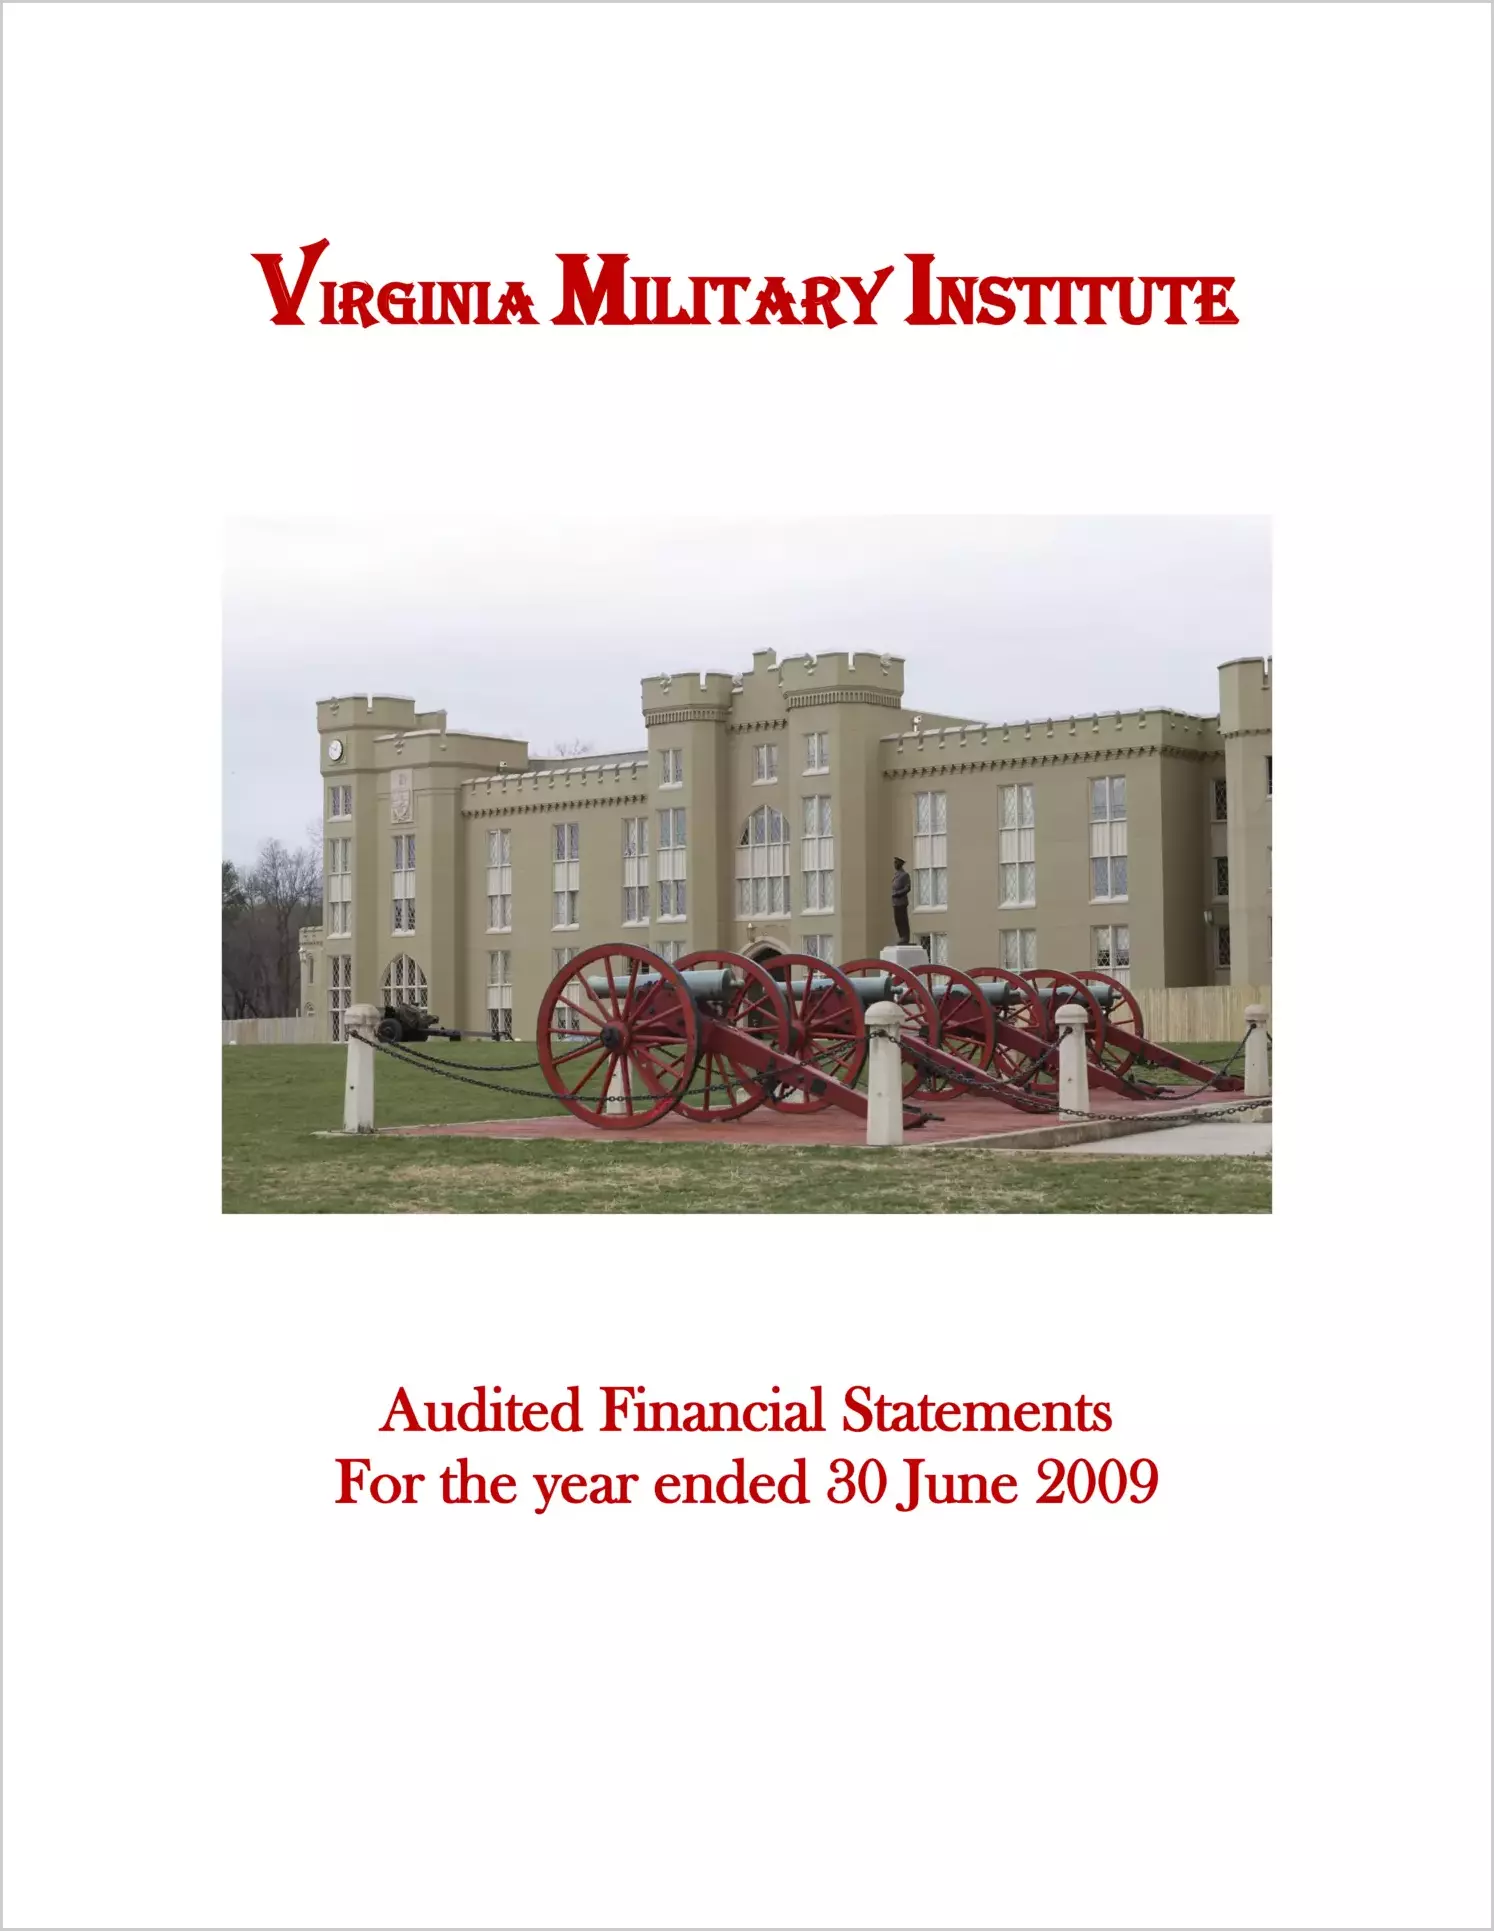 Virginia Military Institute Financial Statements for year ended 2009